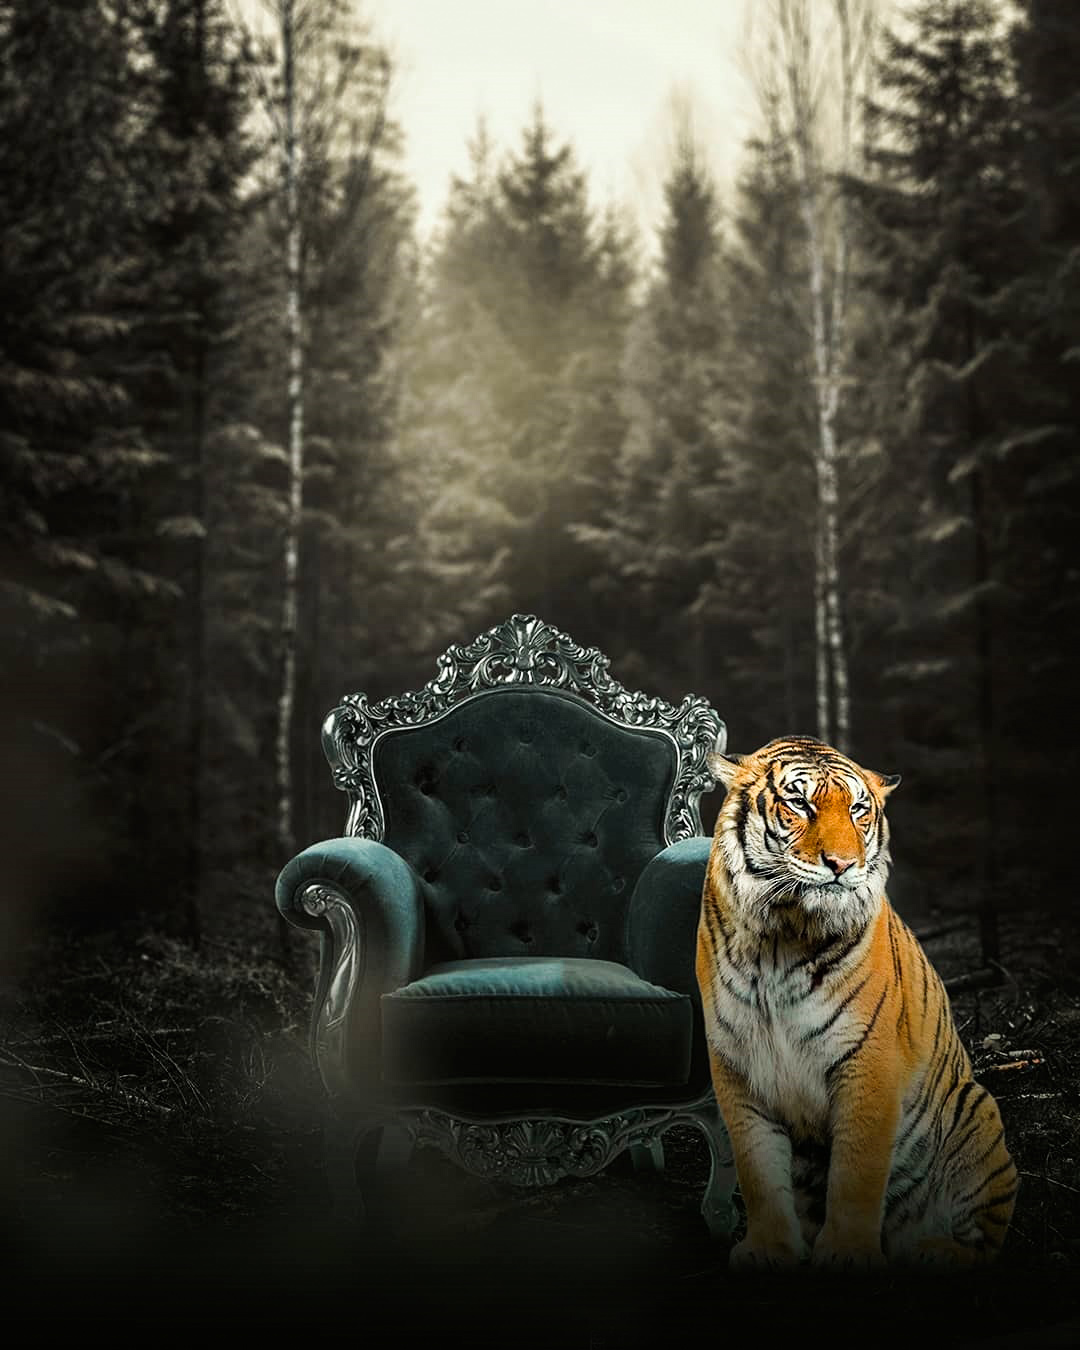  Chair In Forest With Tiger Photo Editing Background Full HD ...